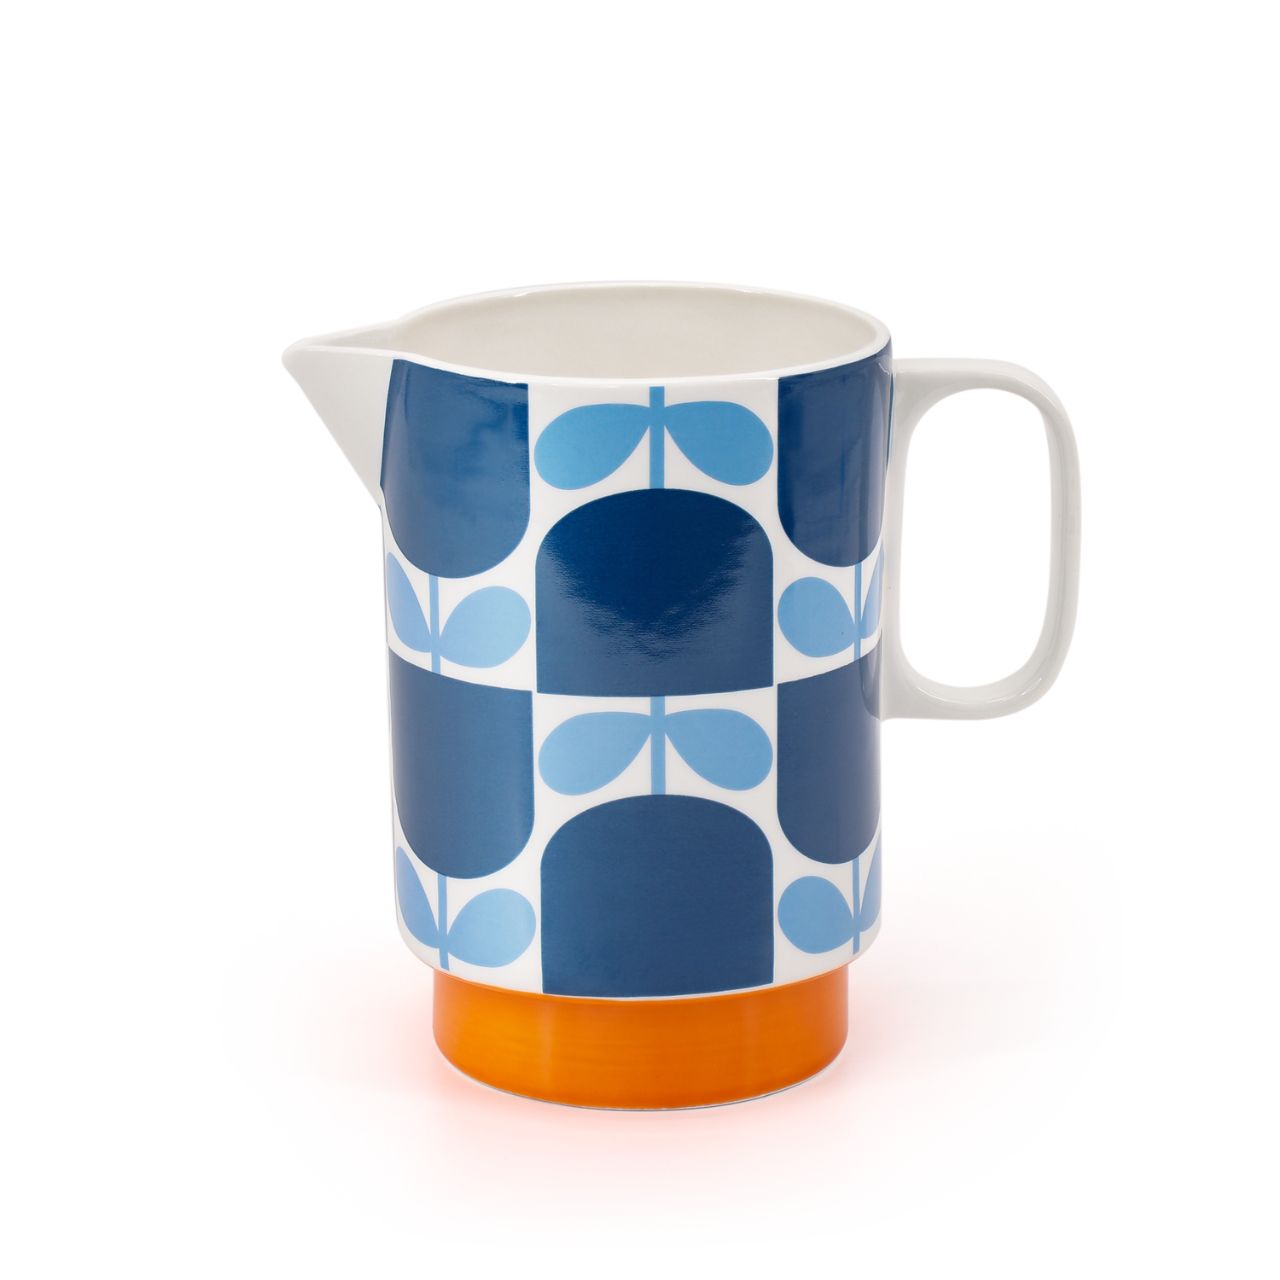 Orla Kiely Block Flower Navy Pitcher Jug  DESIGNED IN THE UK BY ORLA KIELY: This water jug has a capacity of 1.5 Litre and has a unique 'Block Flower' print design.